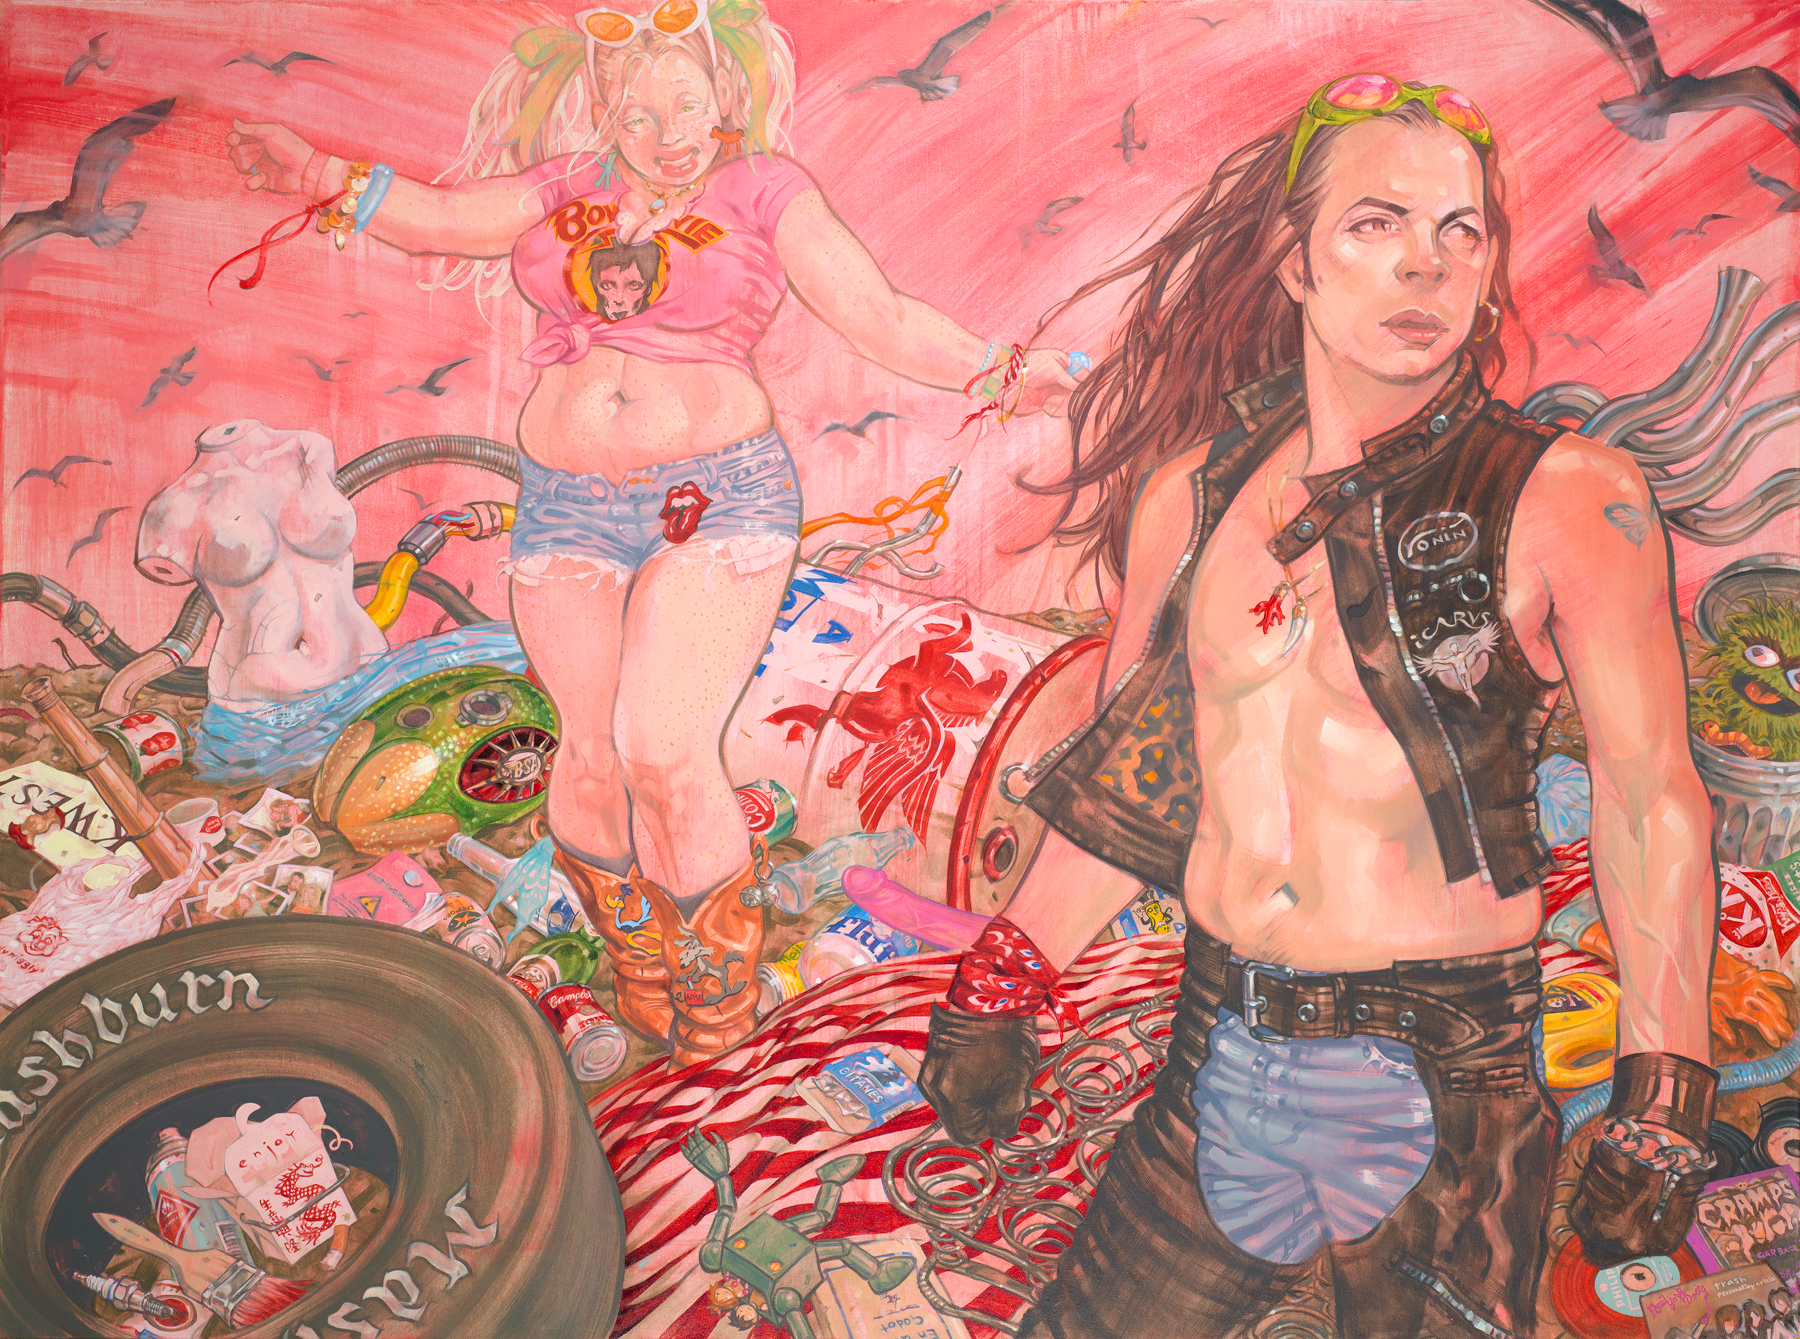 Stardust, 2012, courtesy of Kimberly Childress Ward, oil on canvas, 48 x 65 inches, by Taiyo la Paix